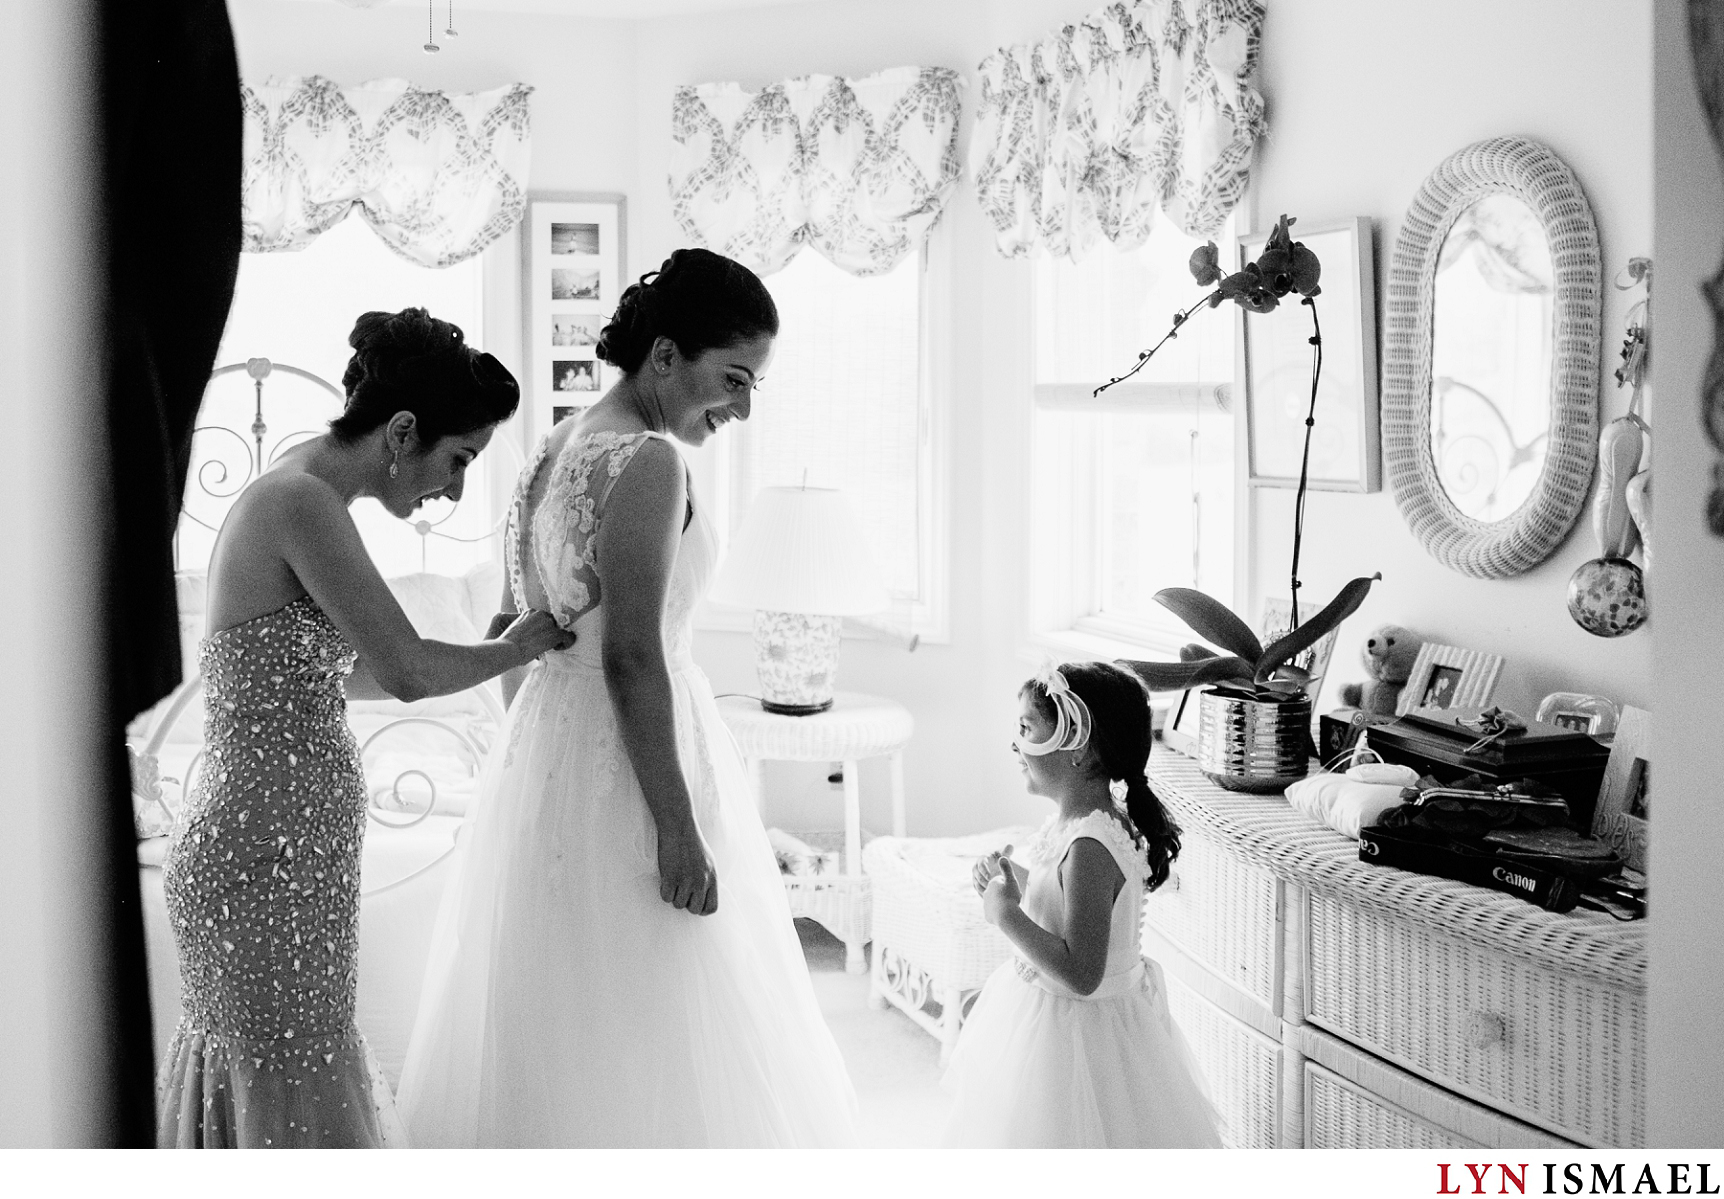 Flower girl looks admiringly at the bride as she got dressed in her wedding gown.